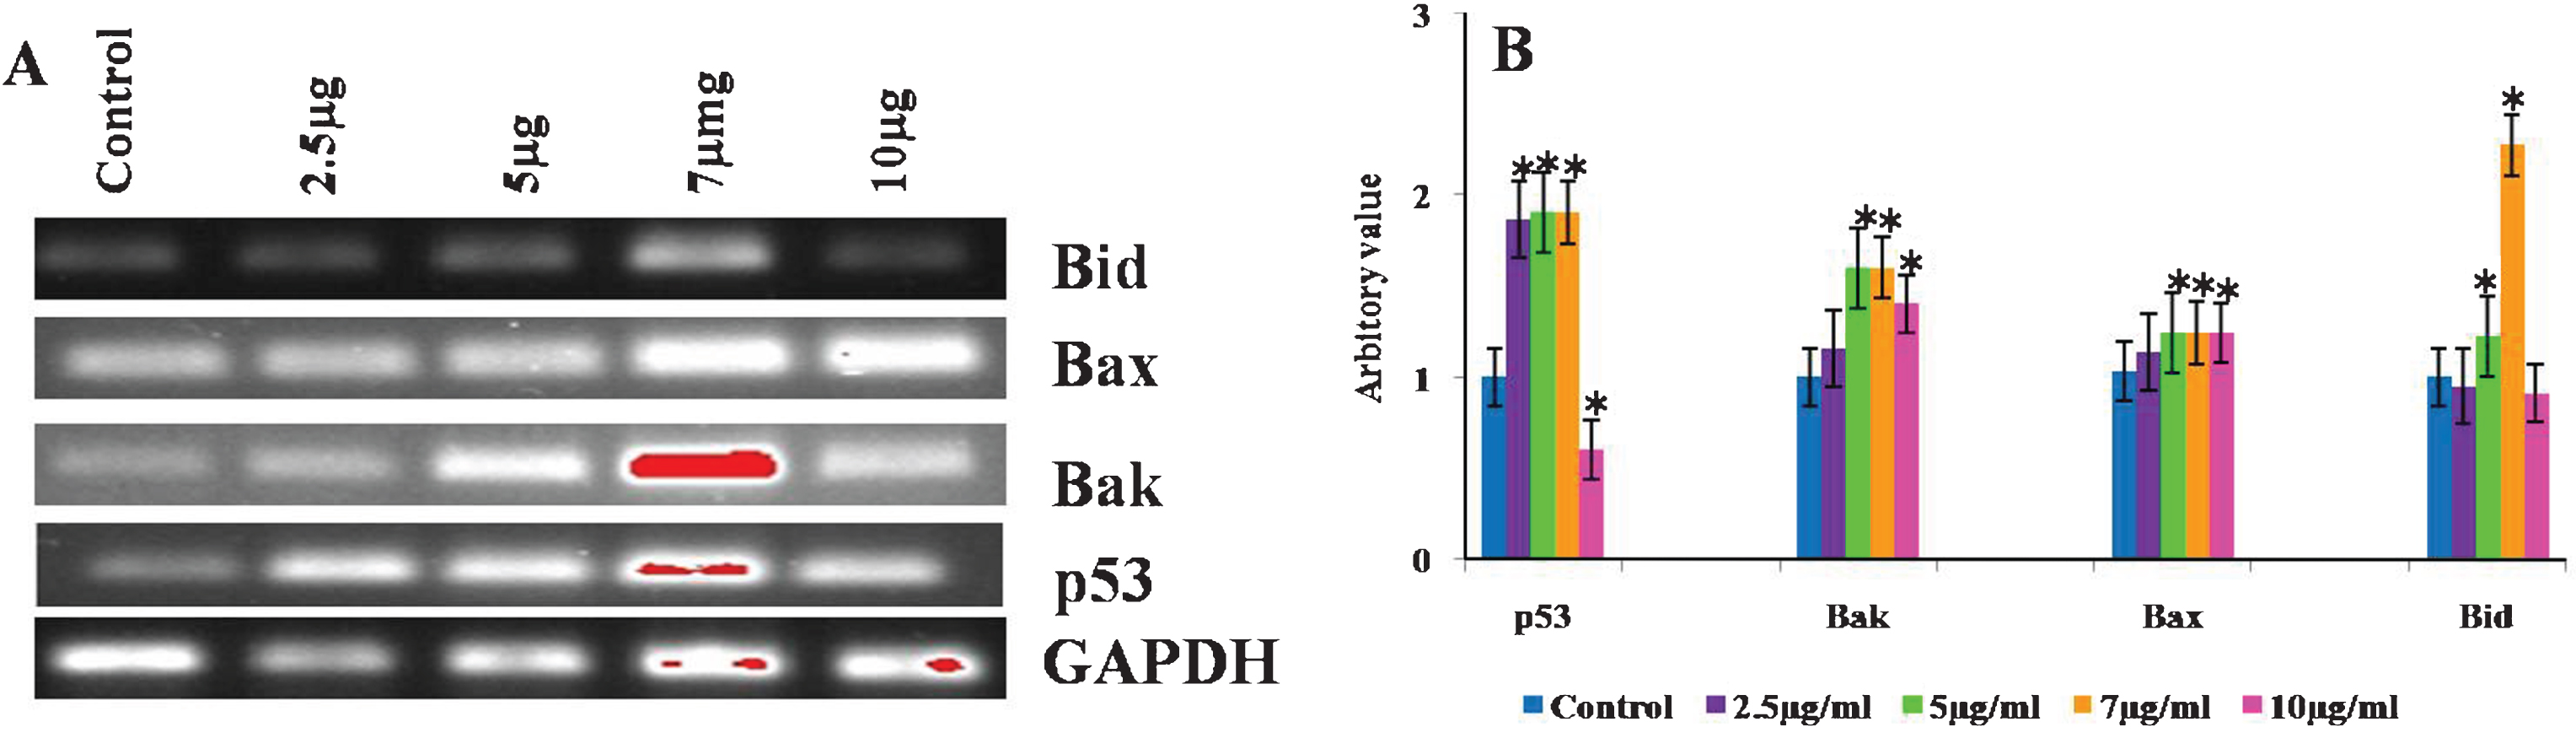 Effect of CKf of different mitochondria associated gene expression in control and treated DU-145 cells. The experiment was repeated three times. A: Gel imaged of the PCR products B: Band intensities of each gene.